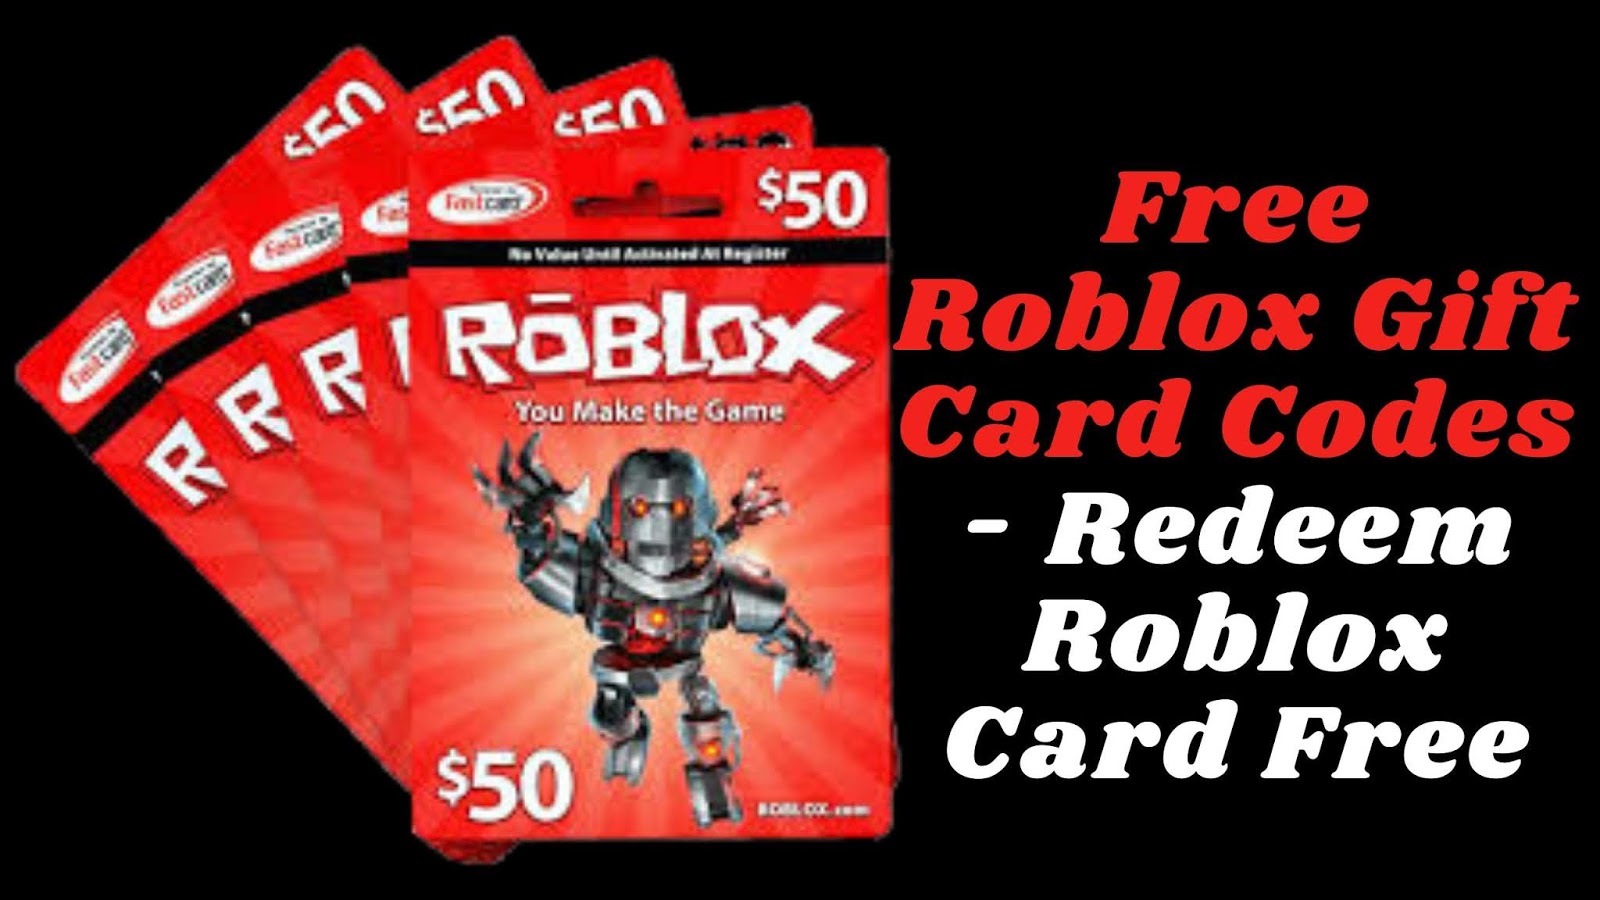 Free Gift Cards Free Roblox Gift Card Codes Redeem Roblox Card Free - redeem roblox cards codes 2020